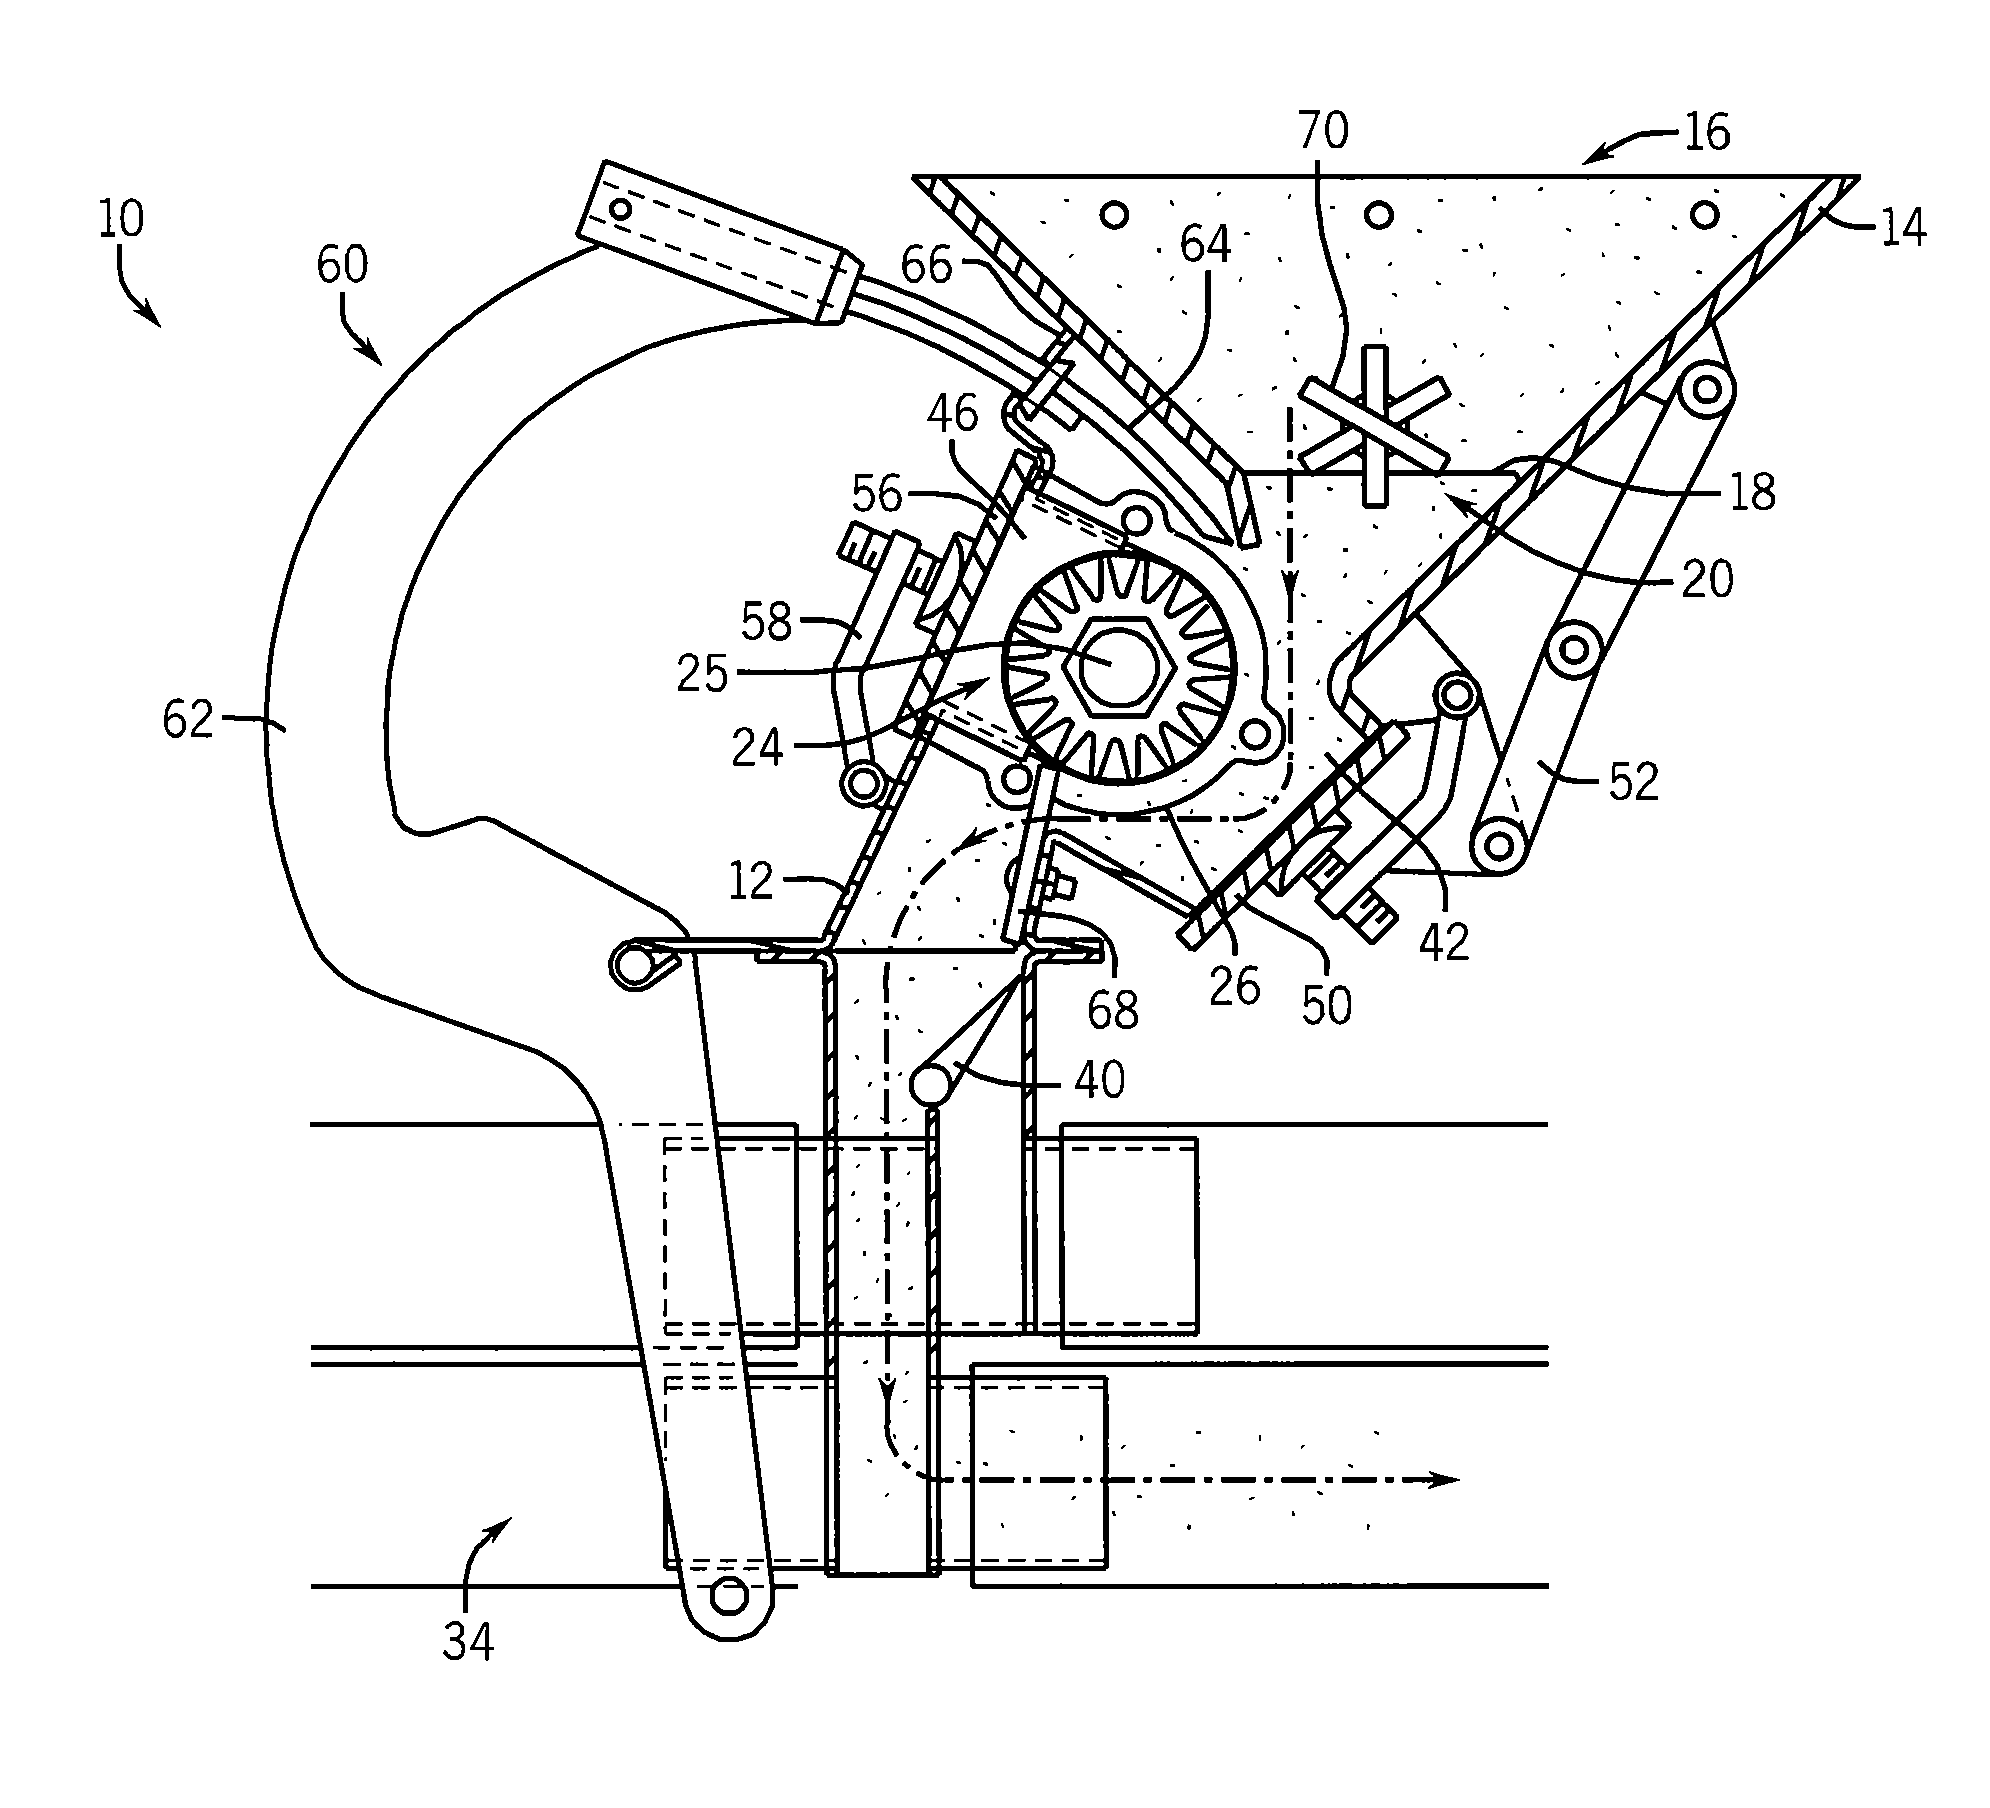 Seed Metering Assembly For Farm Implement And Having Quick-Change Capability And Sectional Control